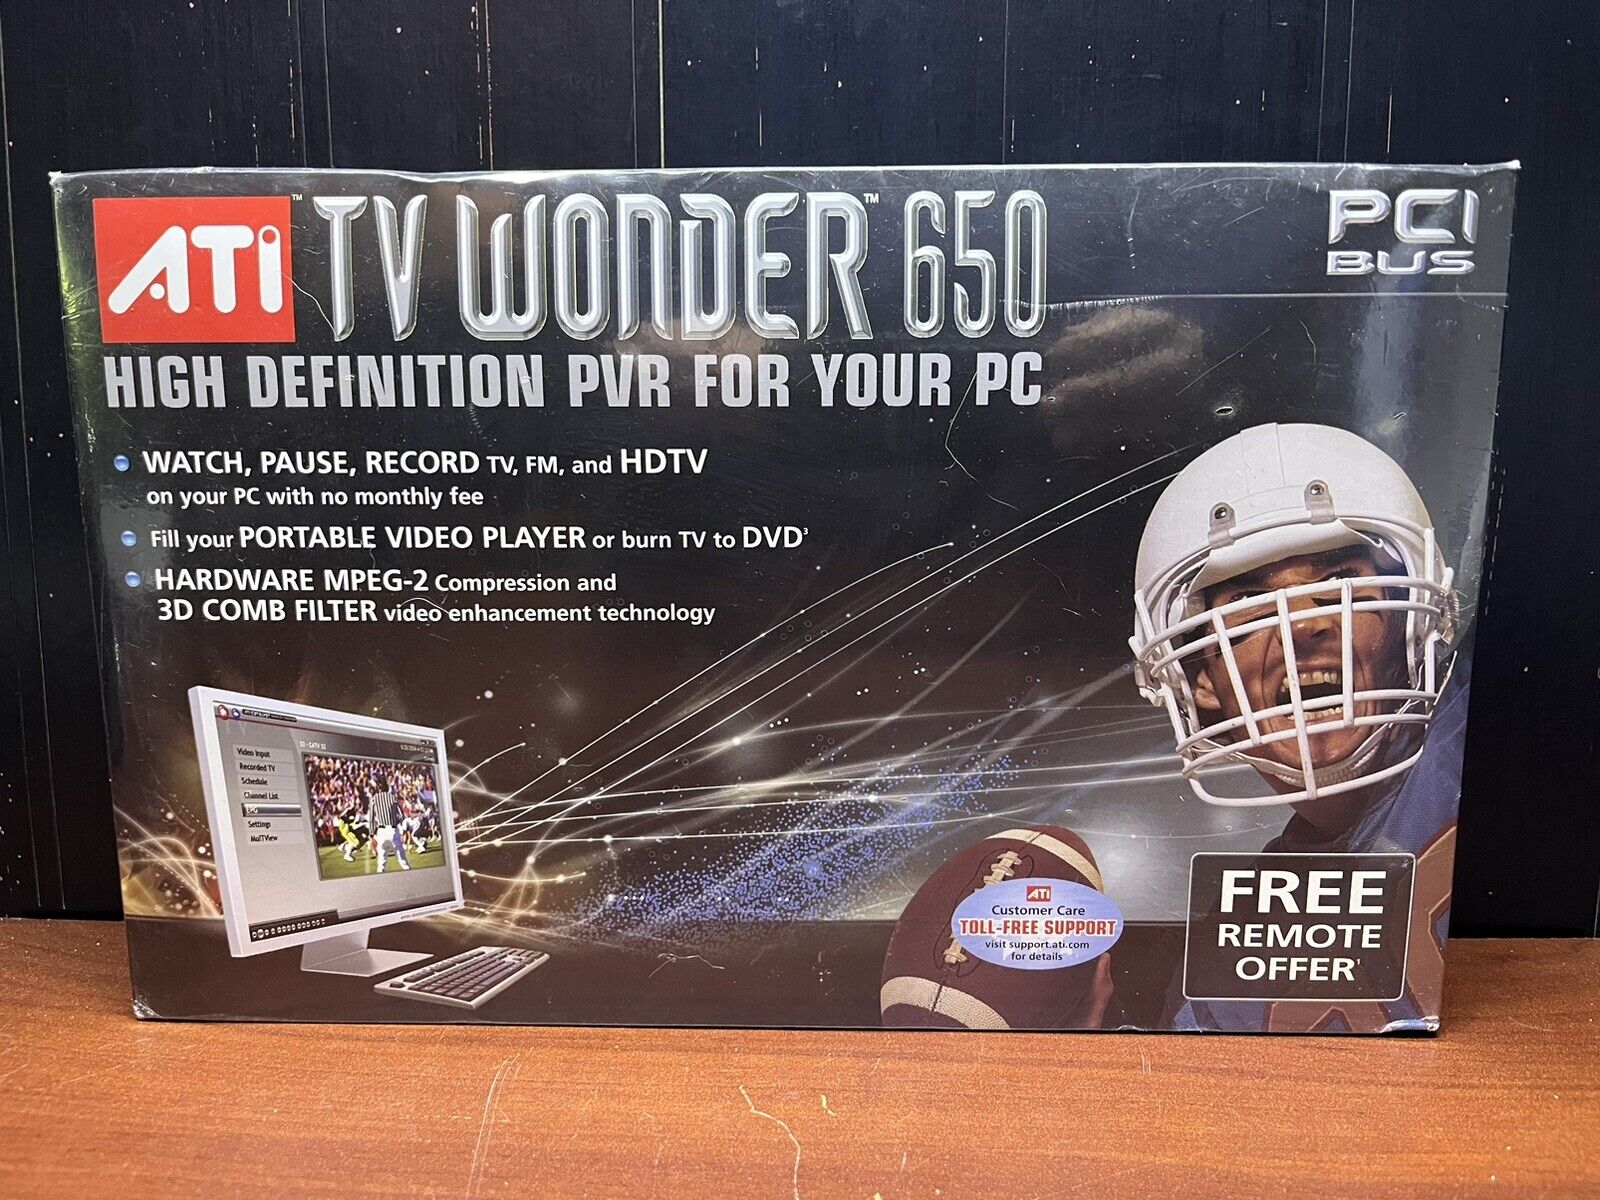 ATI Video Player TV Wonder 650 High Definition PVR Definition For Your PC